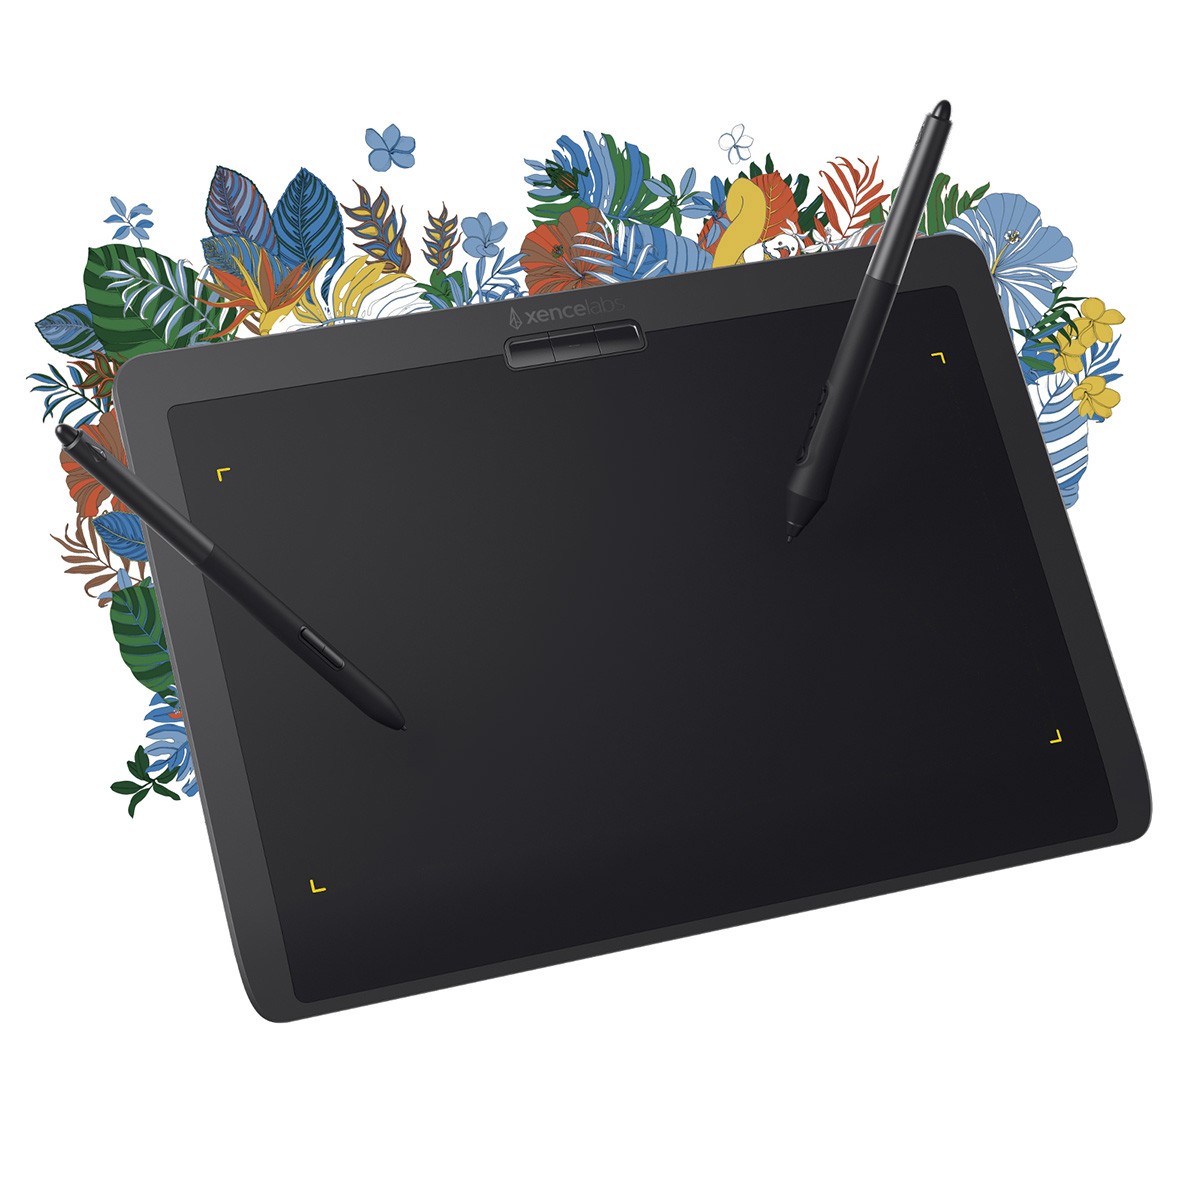 Xencelabs Pen Tablet Small review: The more affordable rival to